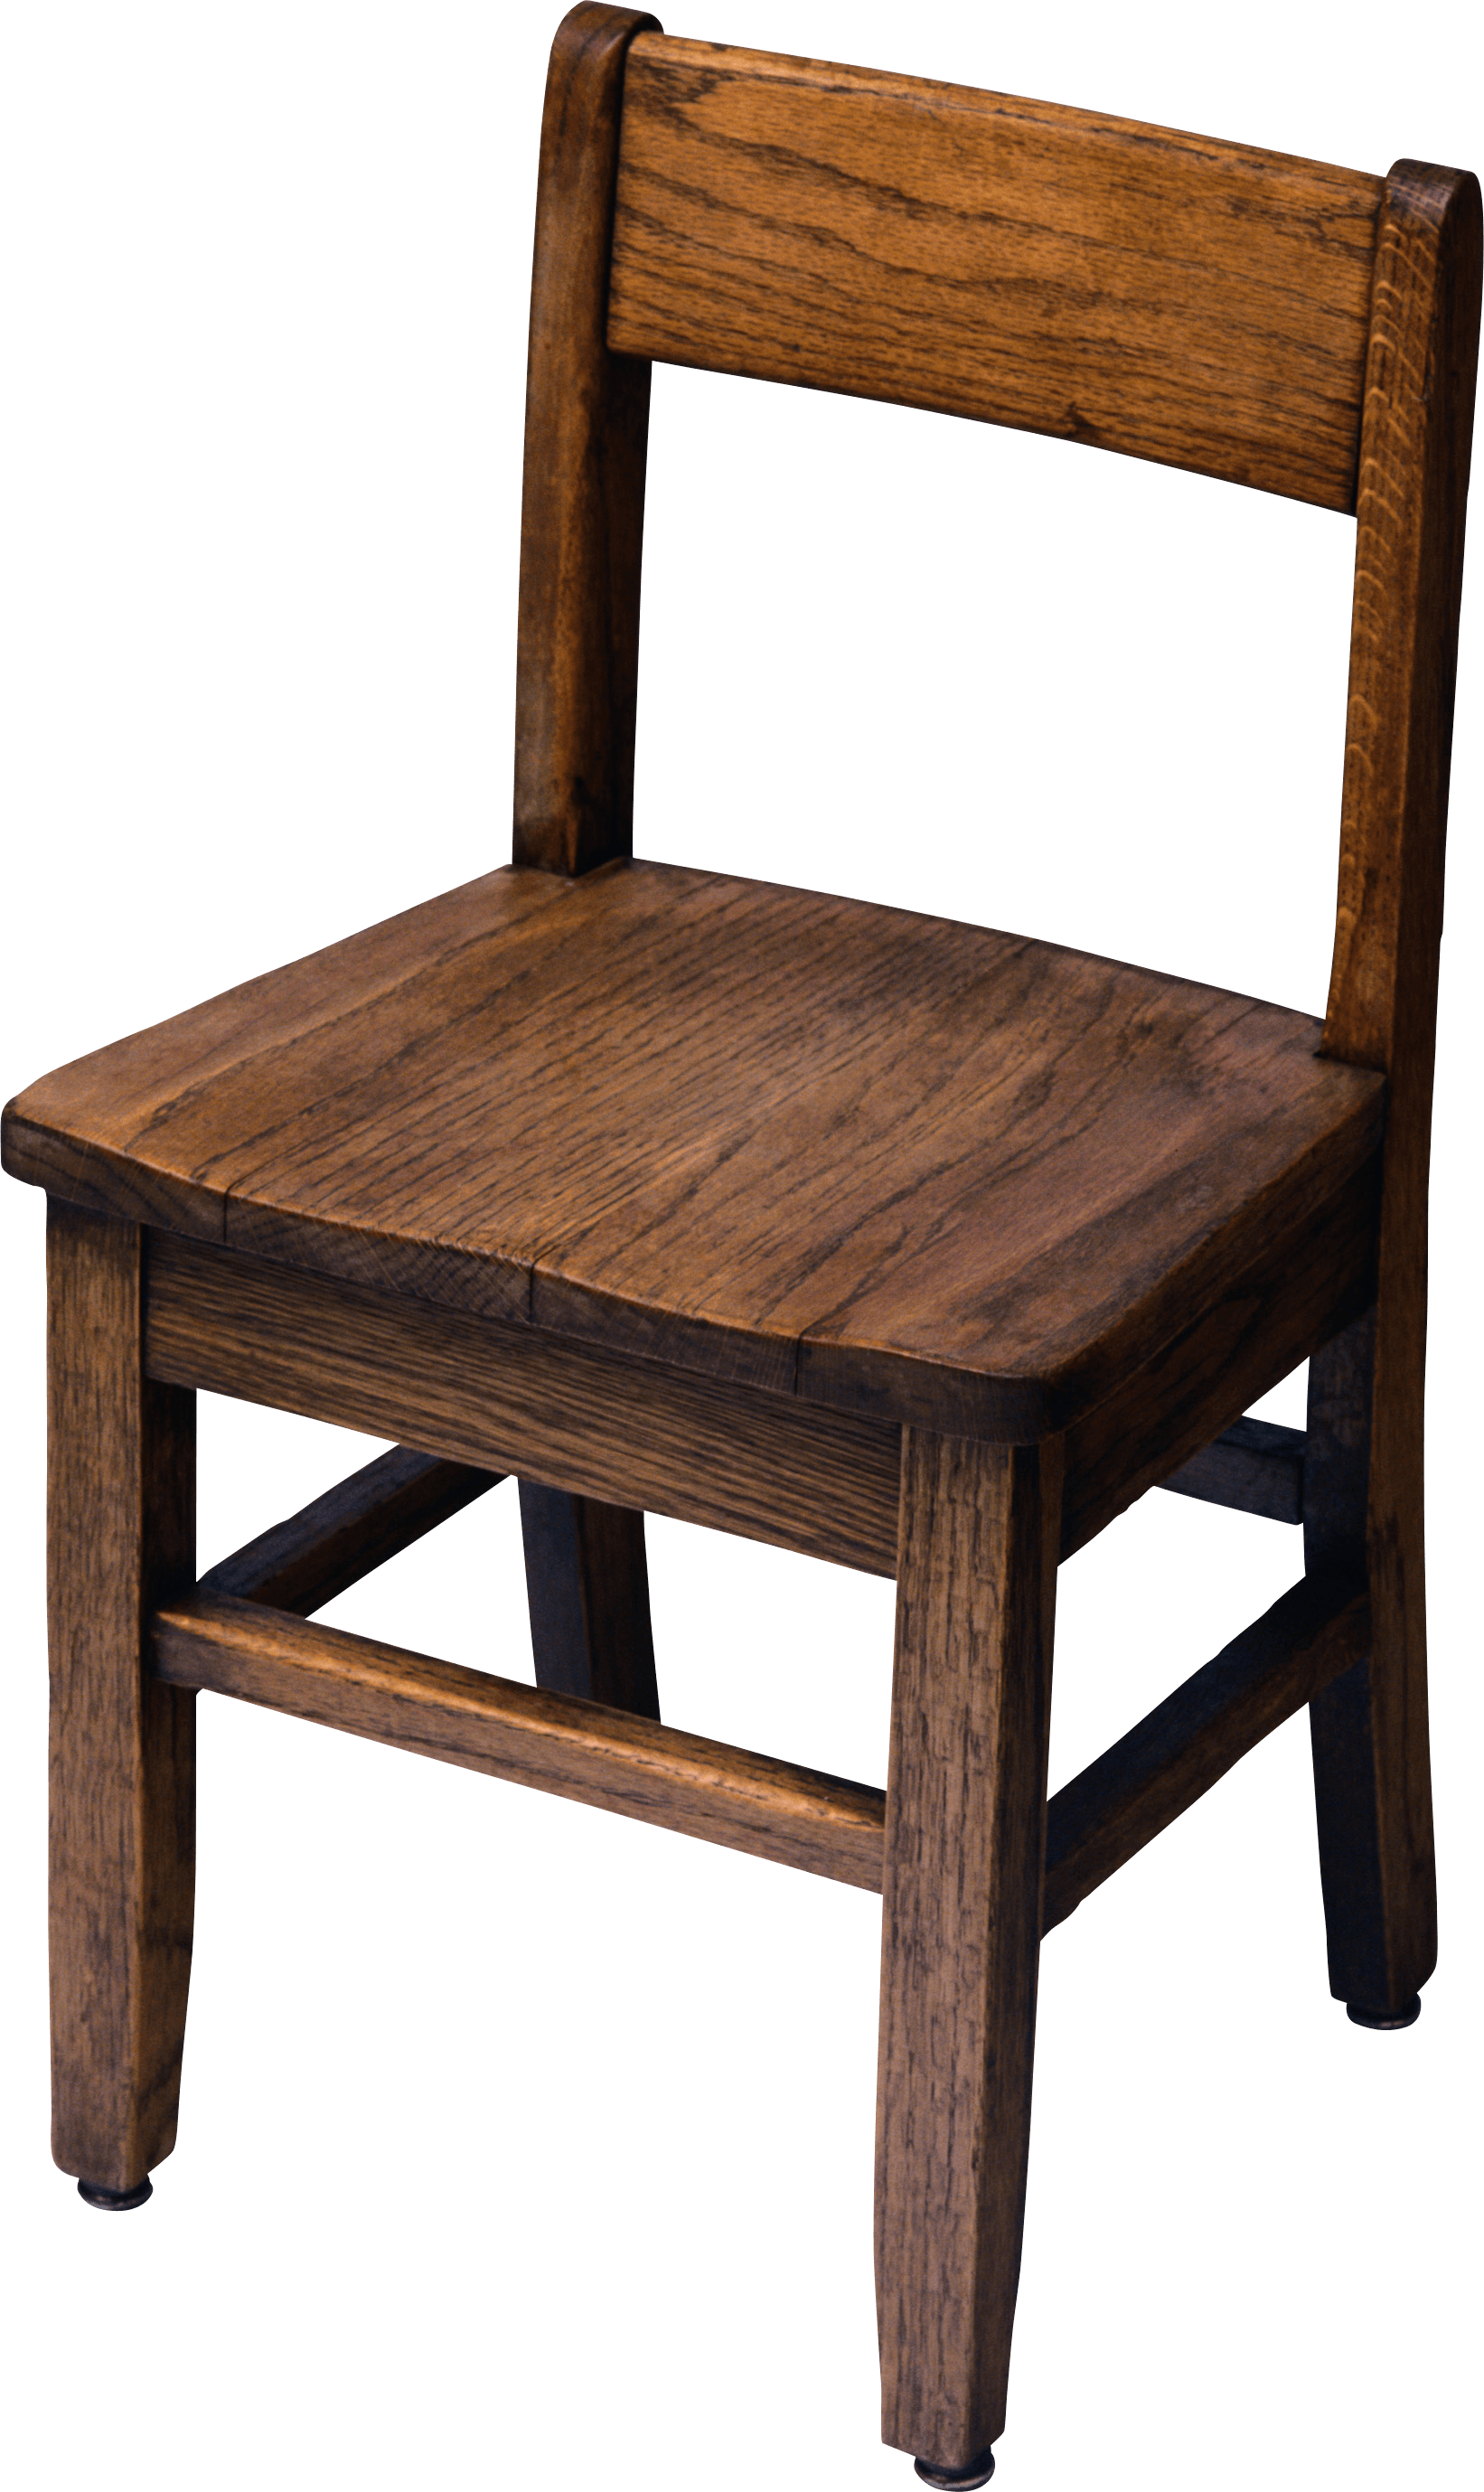 Old Wooden Chair transparent PNG - StickPNG